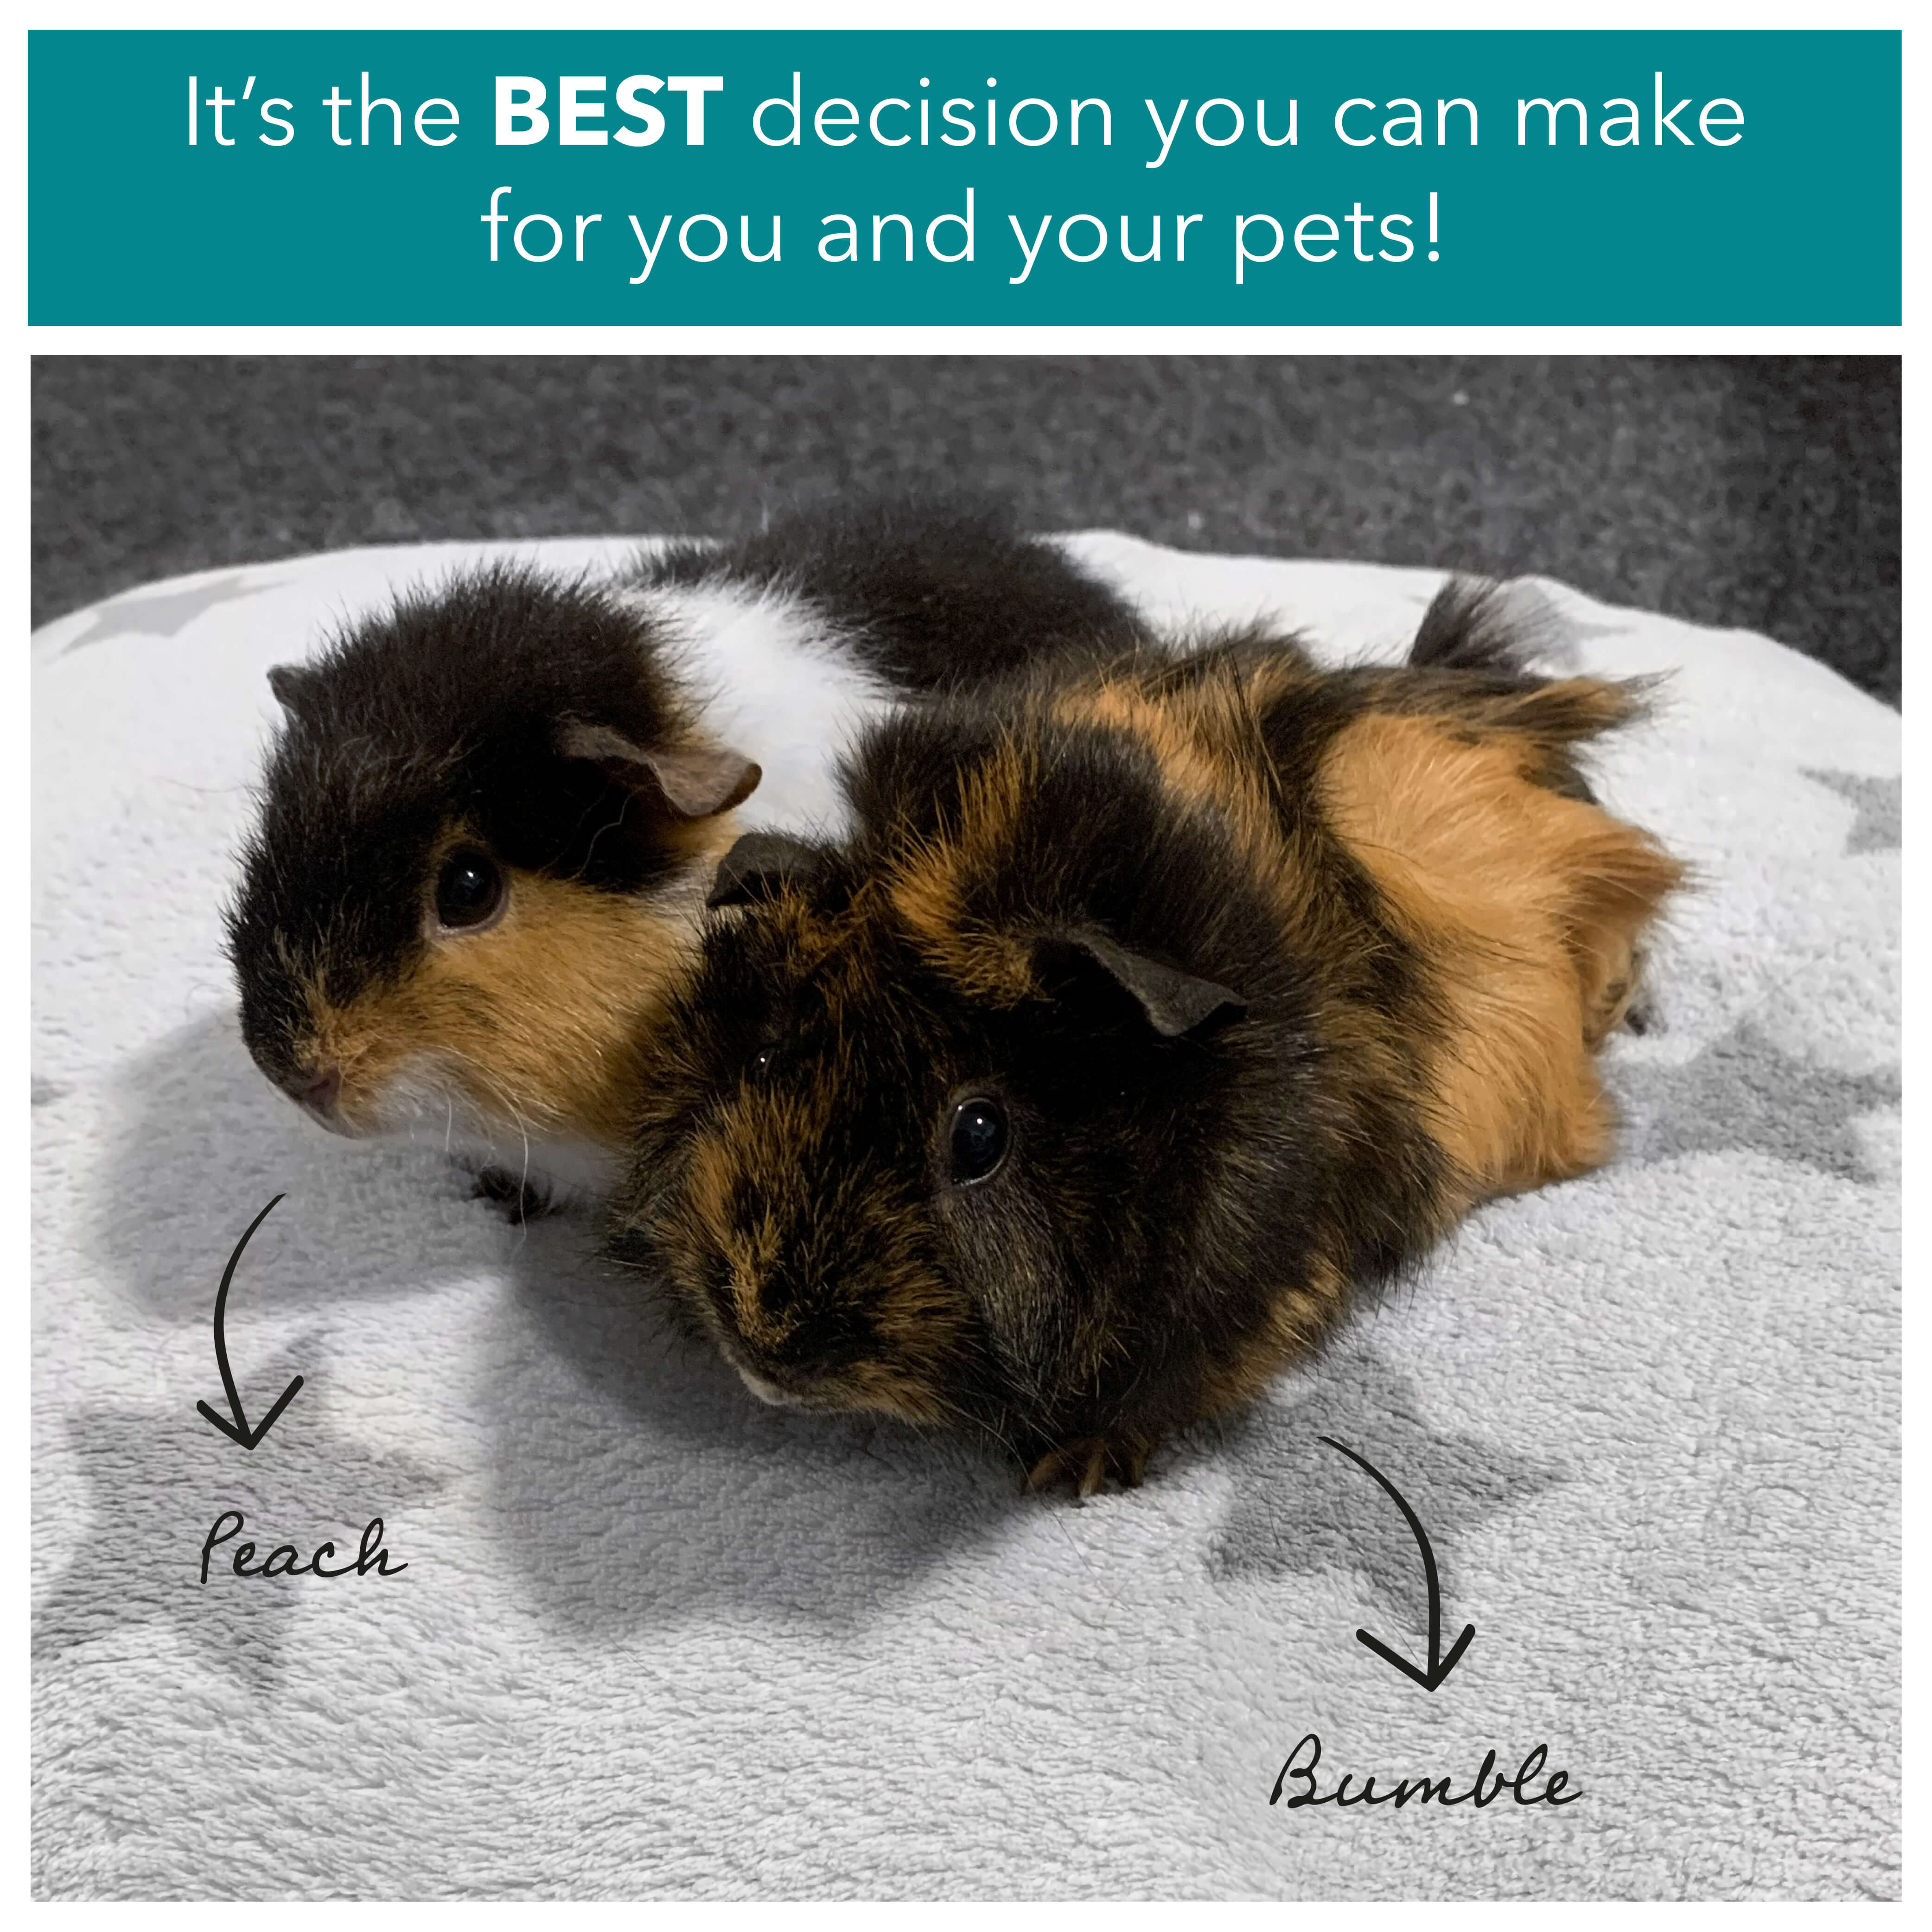 It's the best decision you can make for you and your pets!